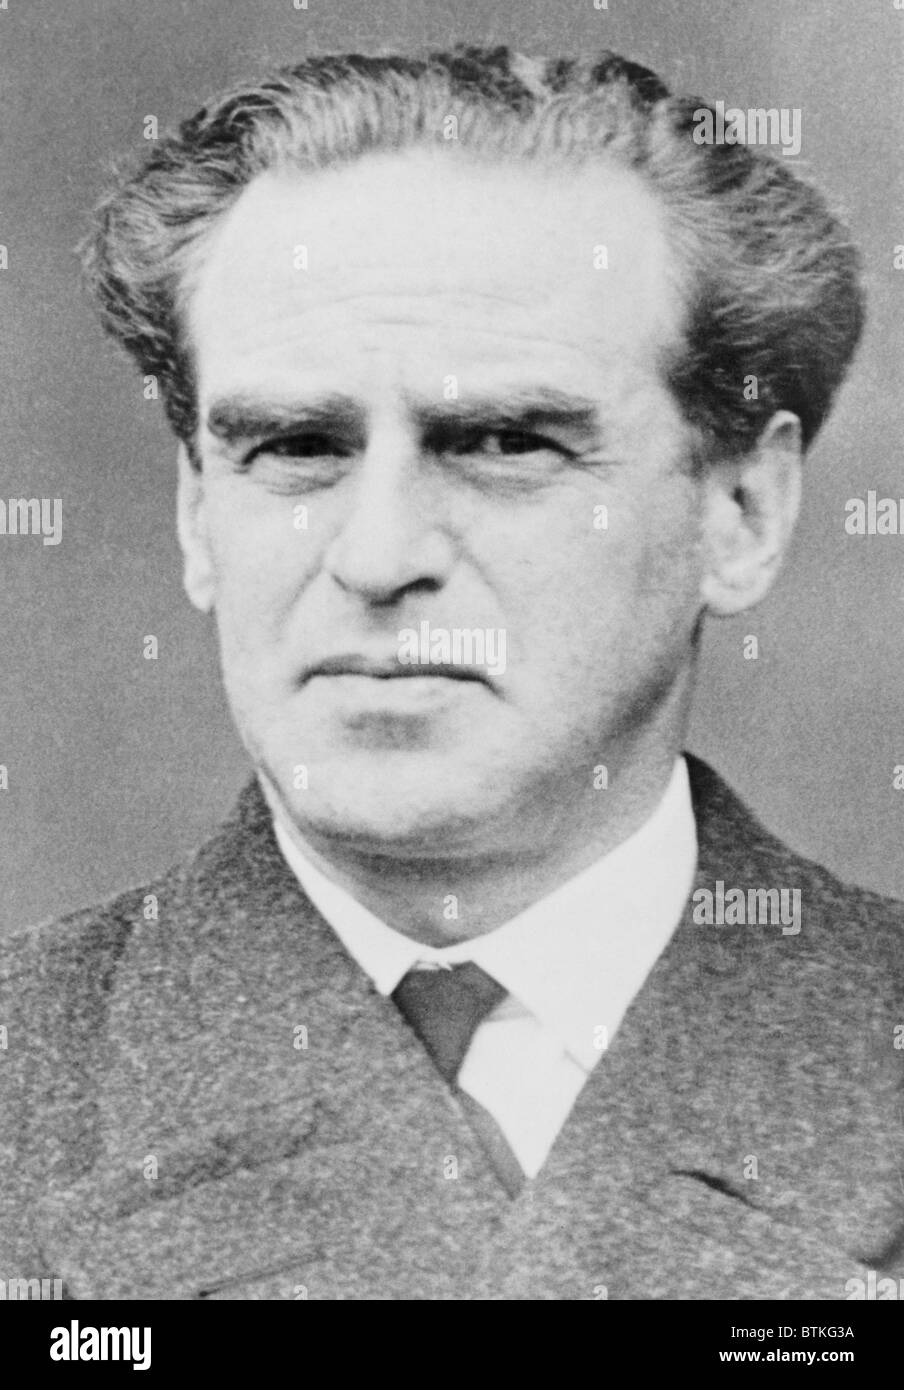 Rudolf Slansky (1901-1952), one of the leading creators and organizers of communist rule in Czechoslovakia after World War II. Slansky, with 13 others, was accused of being a Titoist, advocating a non-Russia-centric form of Communism and was executed in 1952. Stock Photo